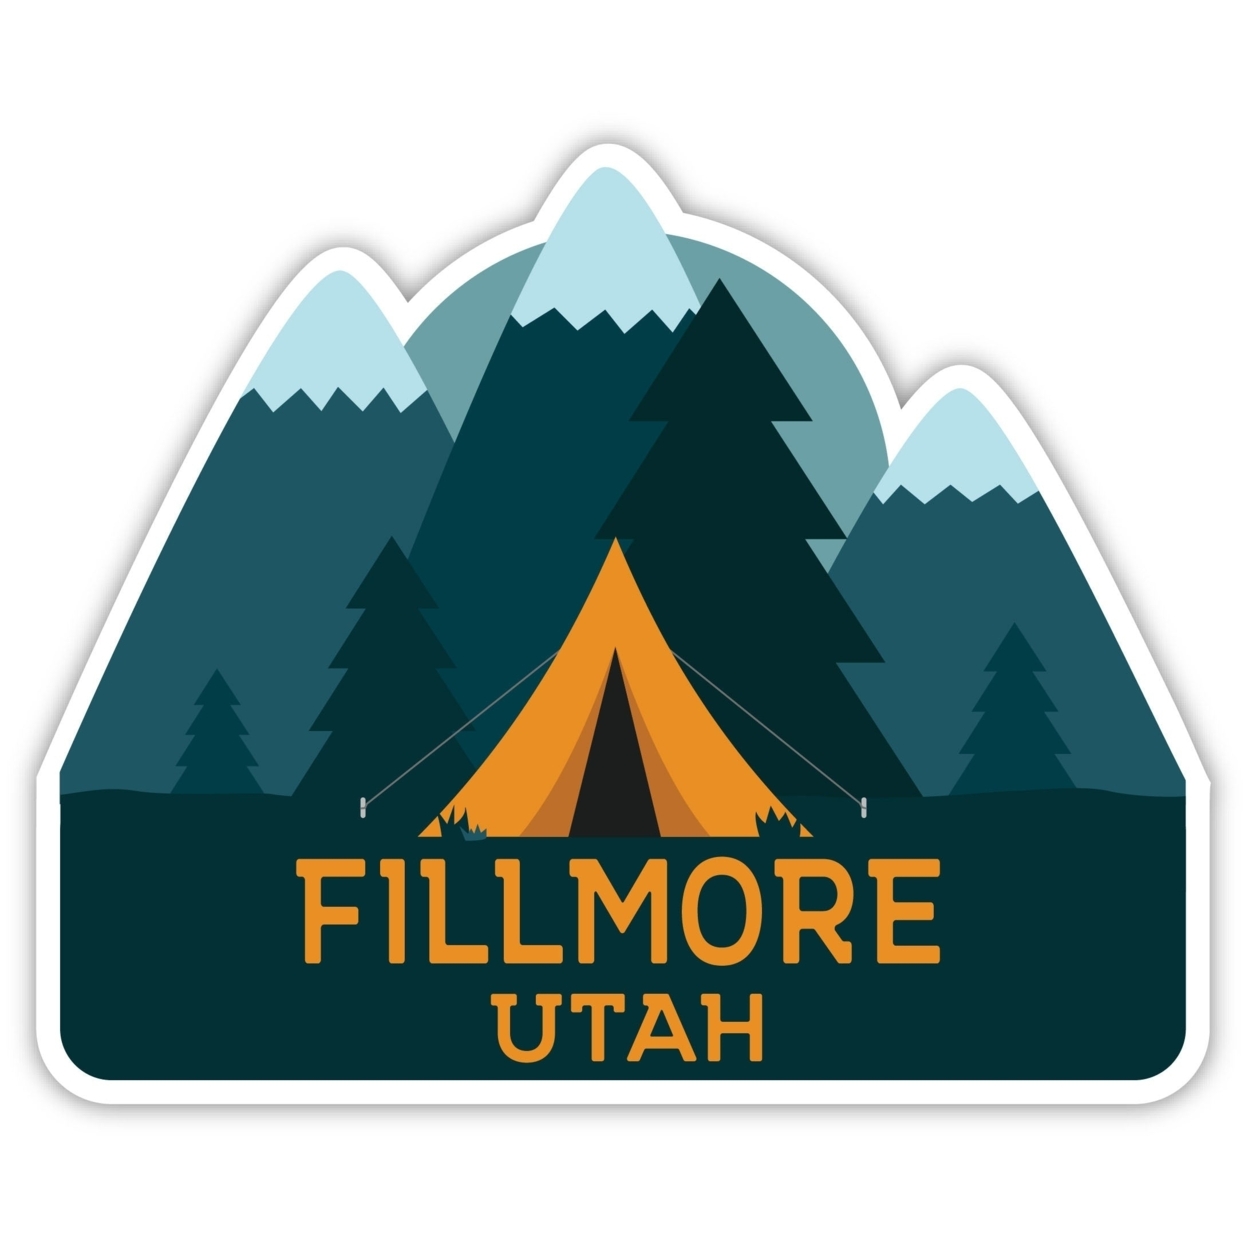 Fillmore Utah Souvenir Decorative Stickers (Choose Theme And Size) - 4-Pack, 6-Inch, Adventures Awaits